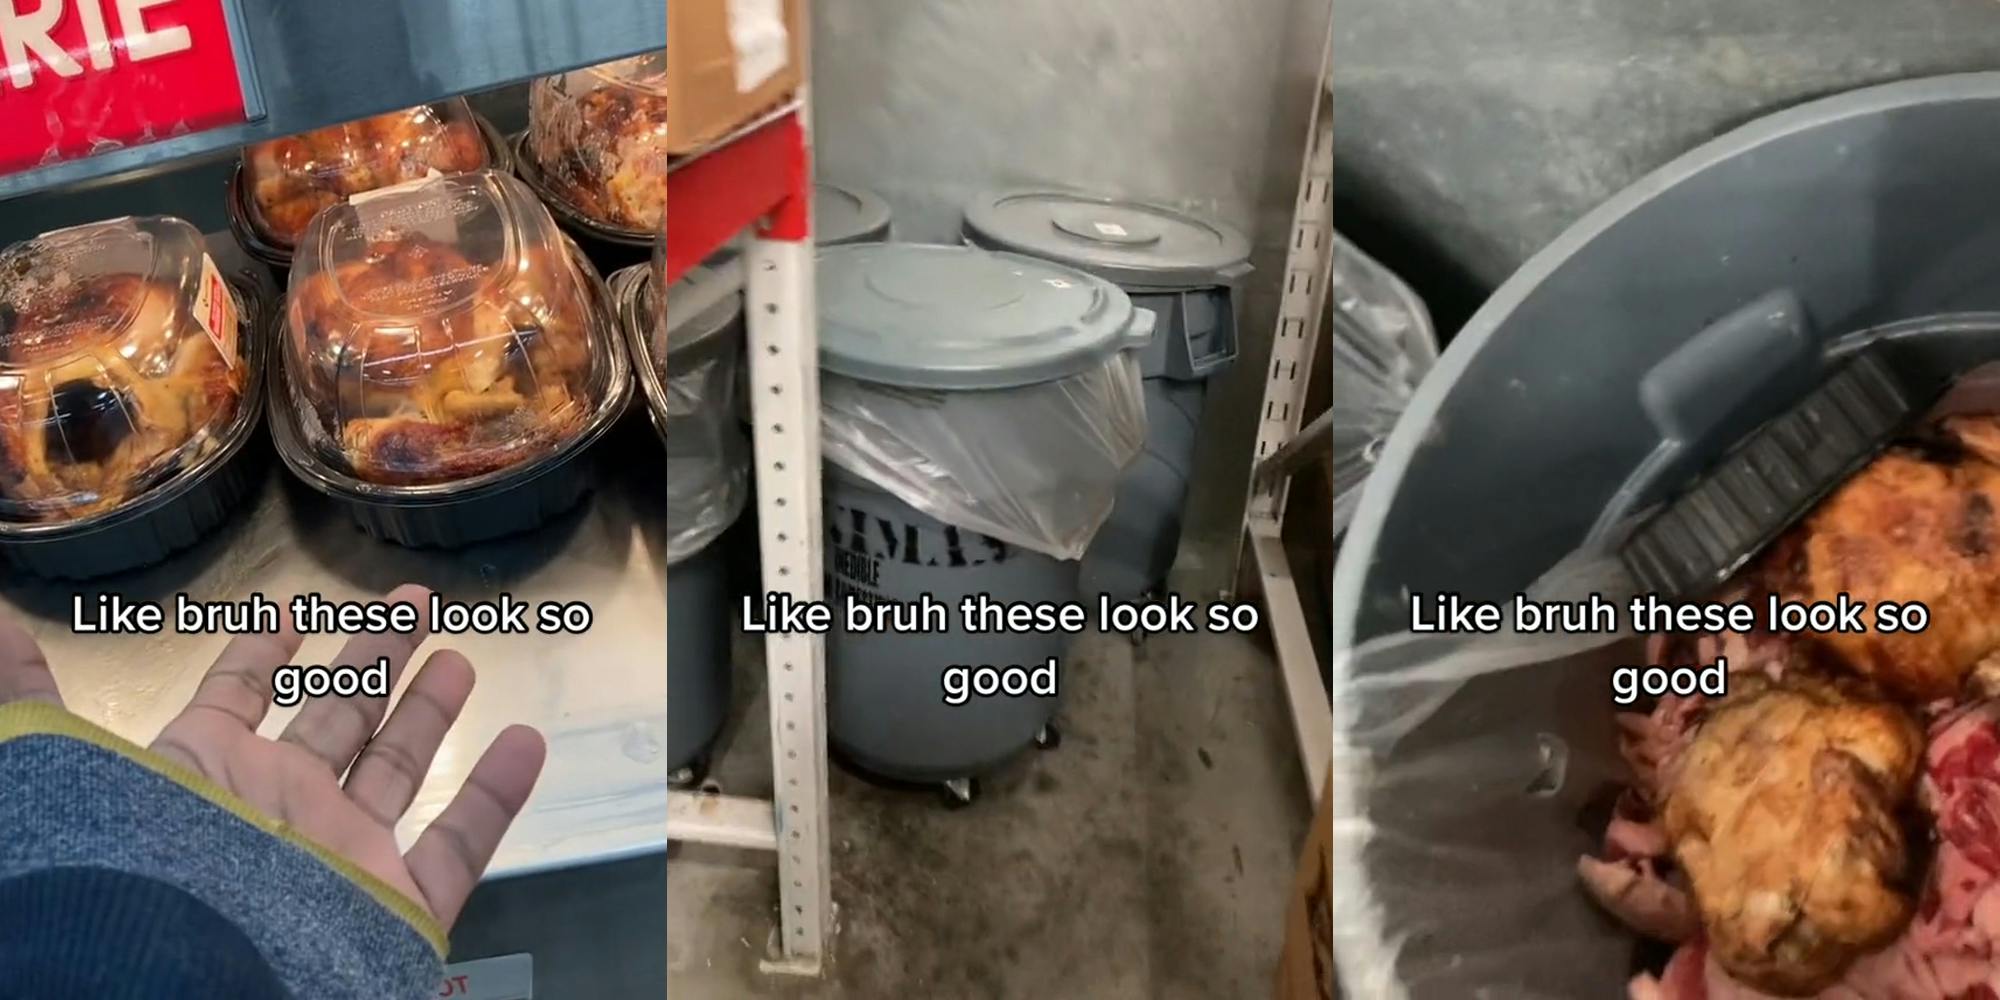 worker's hand out towards rotisserie chickens caption "Like bruh these look so good" (l) trash cans in corner with caption "Like bruh these look so good" (c) rotisserie chickens in trash caption "Like bruh these look so good" (r)